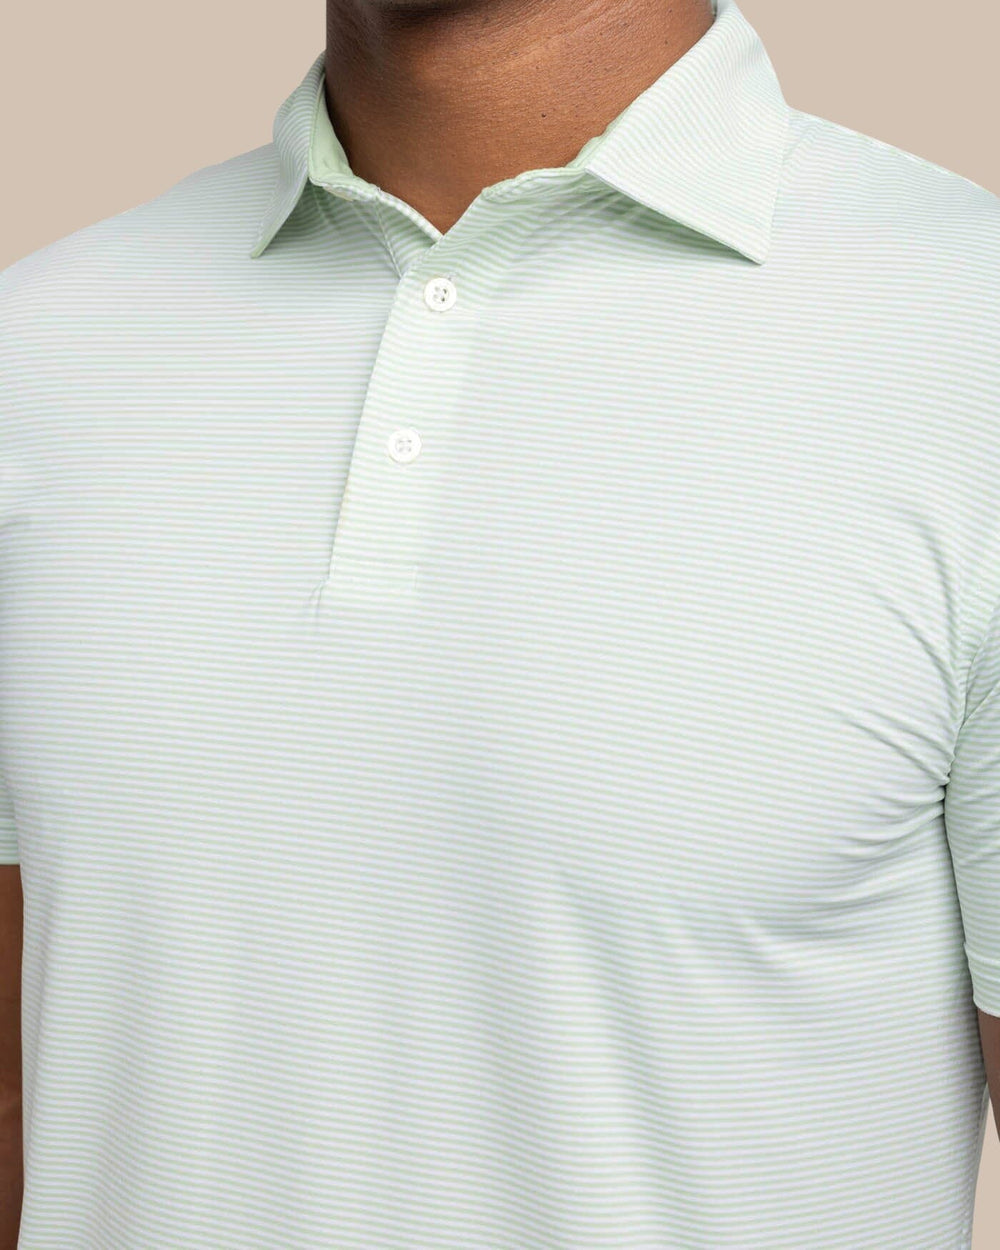 The detail view of the Southern Tide brrr-eeze Meadowbrook Stripe Polo by Southern Tide - Smoke Green